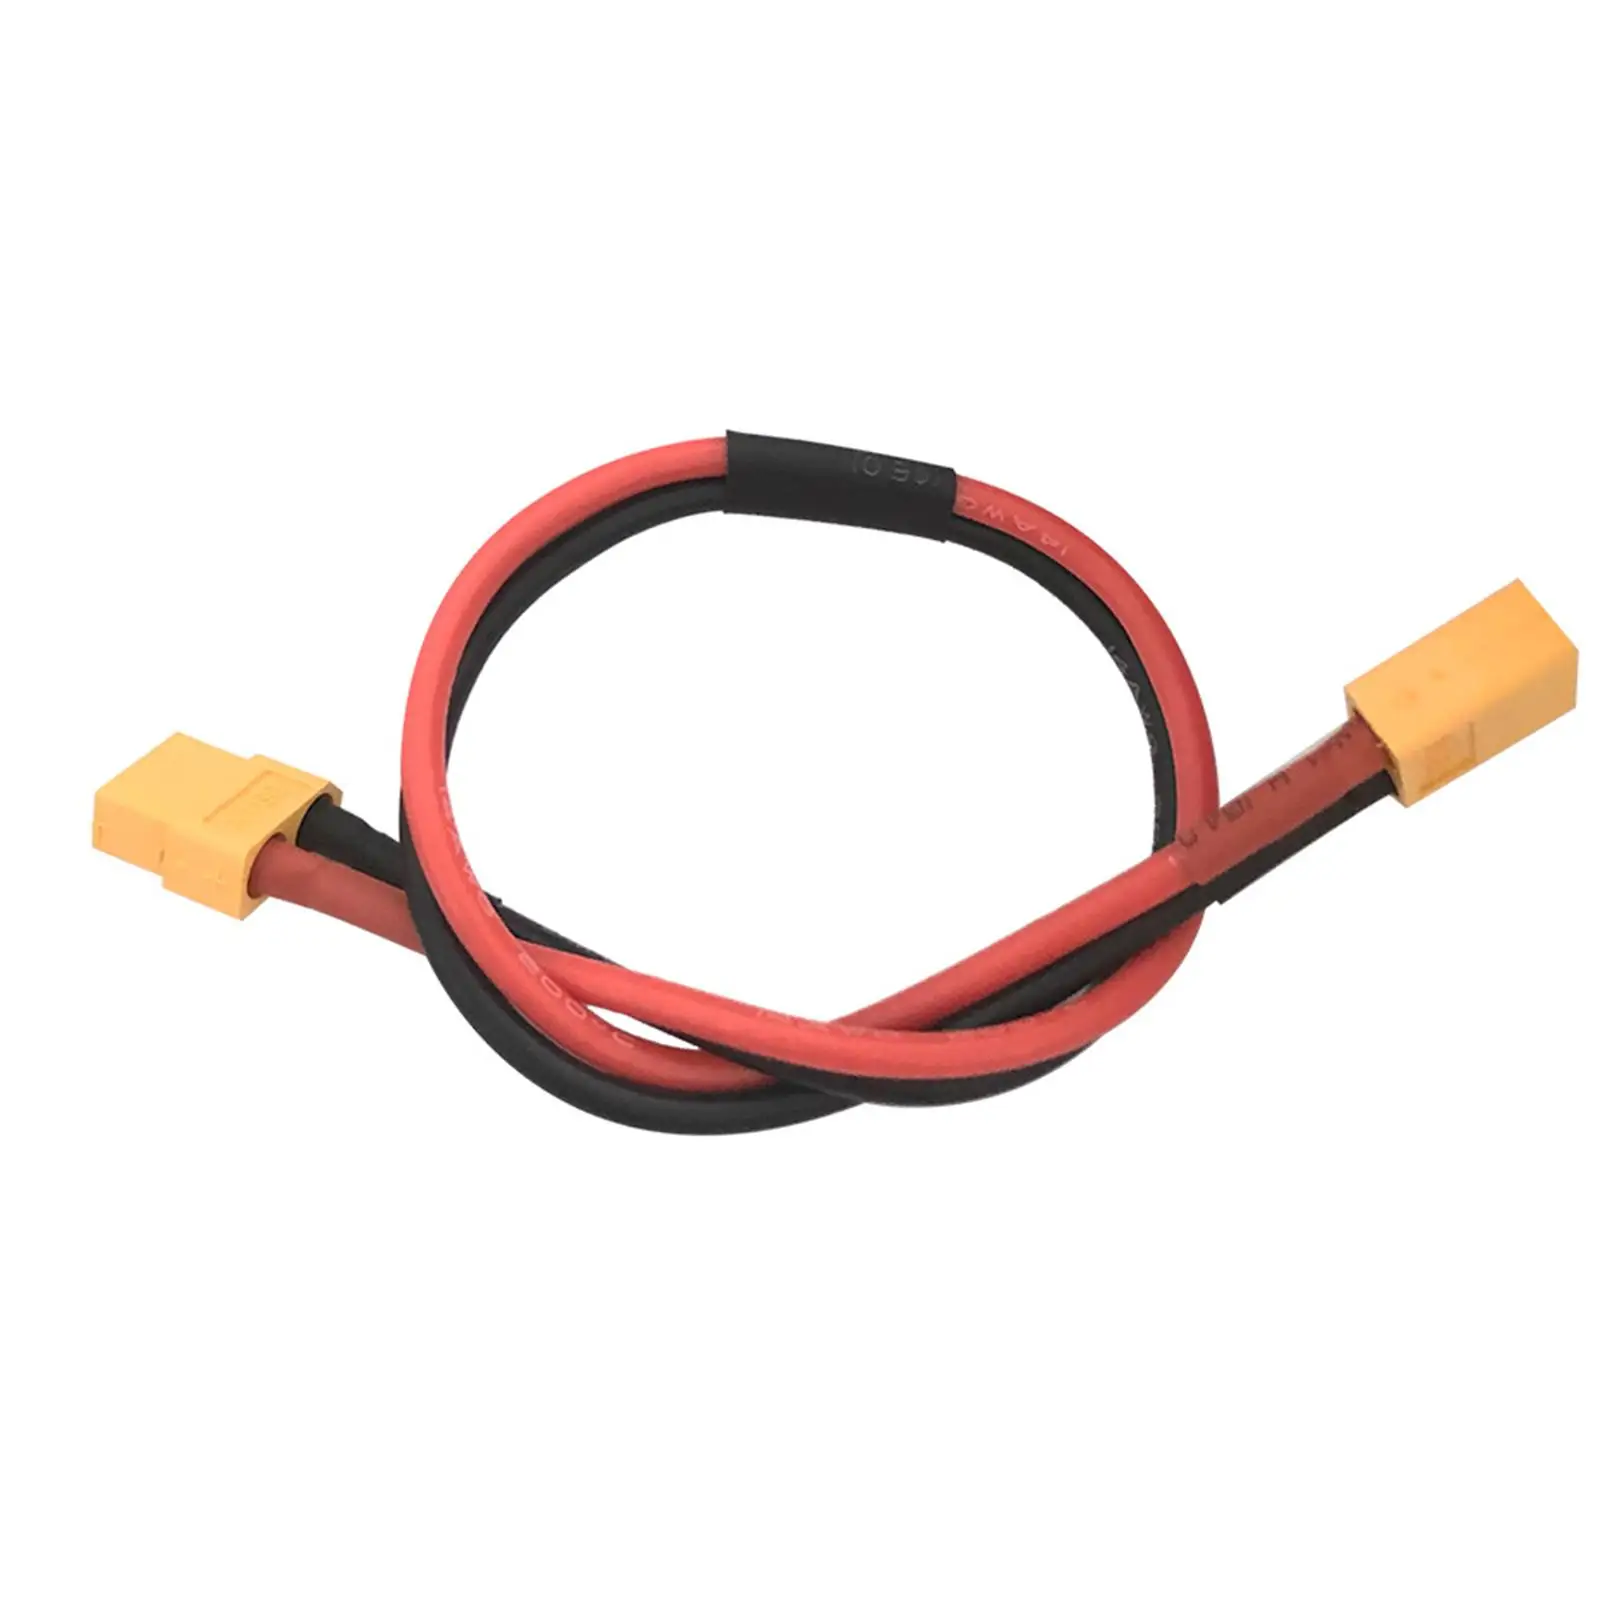 XT60 to XT60 Silicone Wire Portable Adapter Connector Easy to Install Bikes Accessories Adapter Cable XT60 to XT60 Adapter Cable